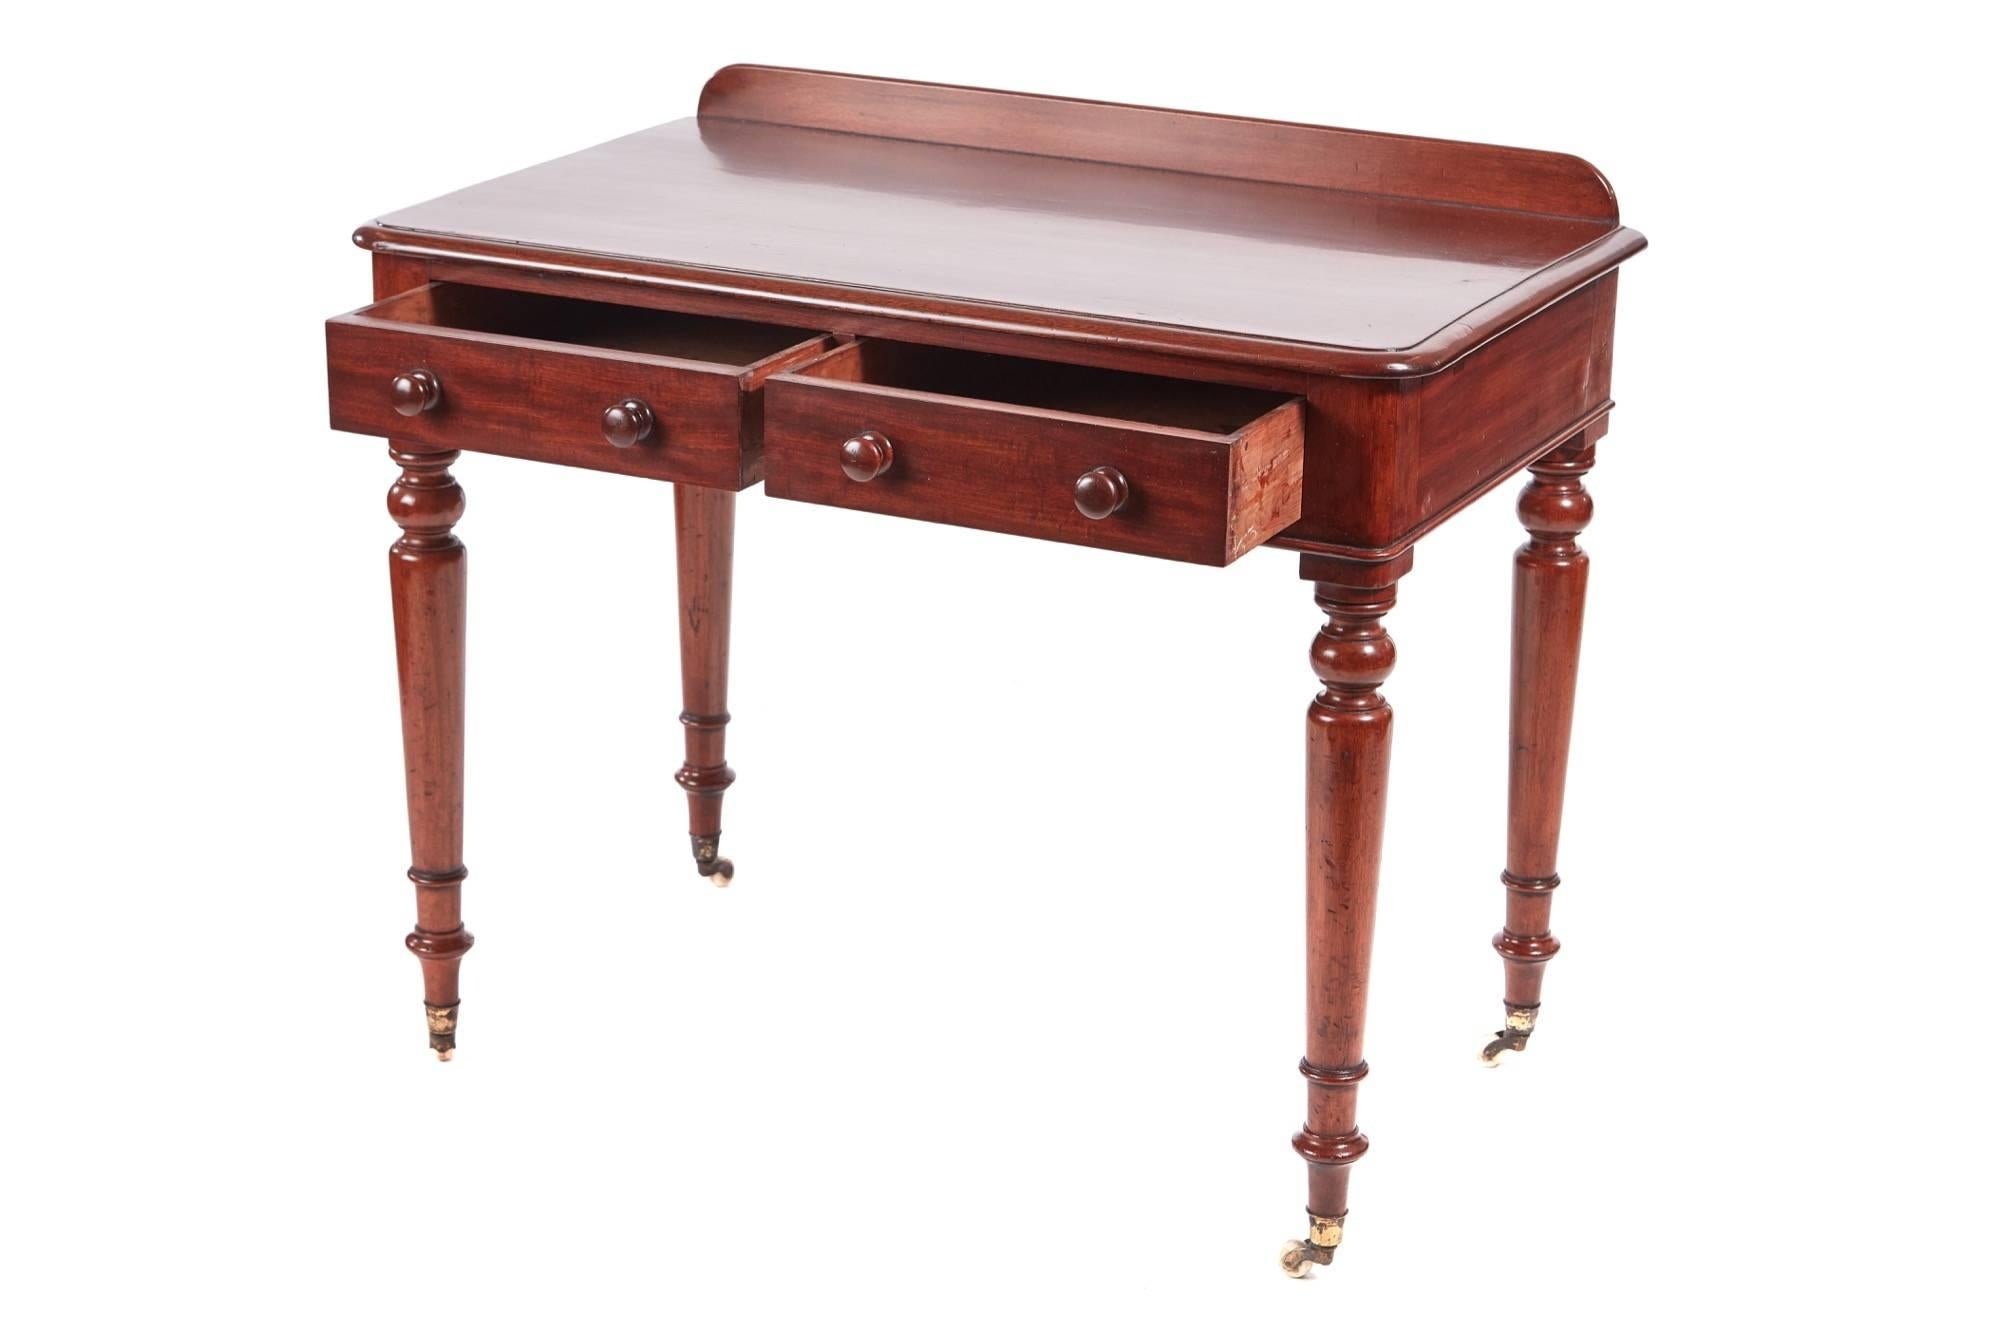 Quality Victorian mahogany side / writing table, having a low back, lovely mahogany top with a moulded edge, two drawers to the frieze with original turned mahogany knobs, standing on four turned legs with original castors.